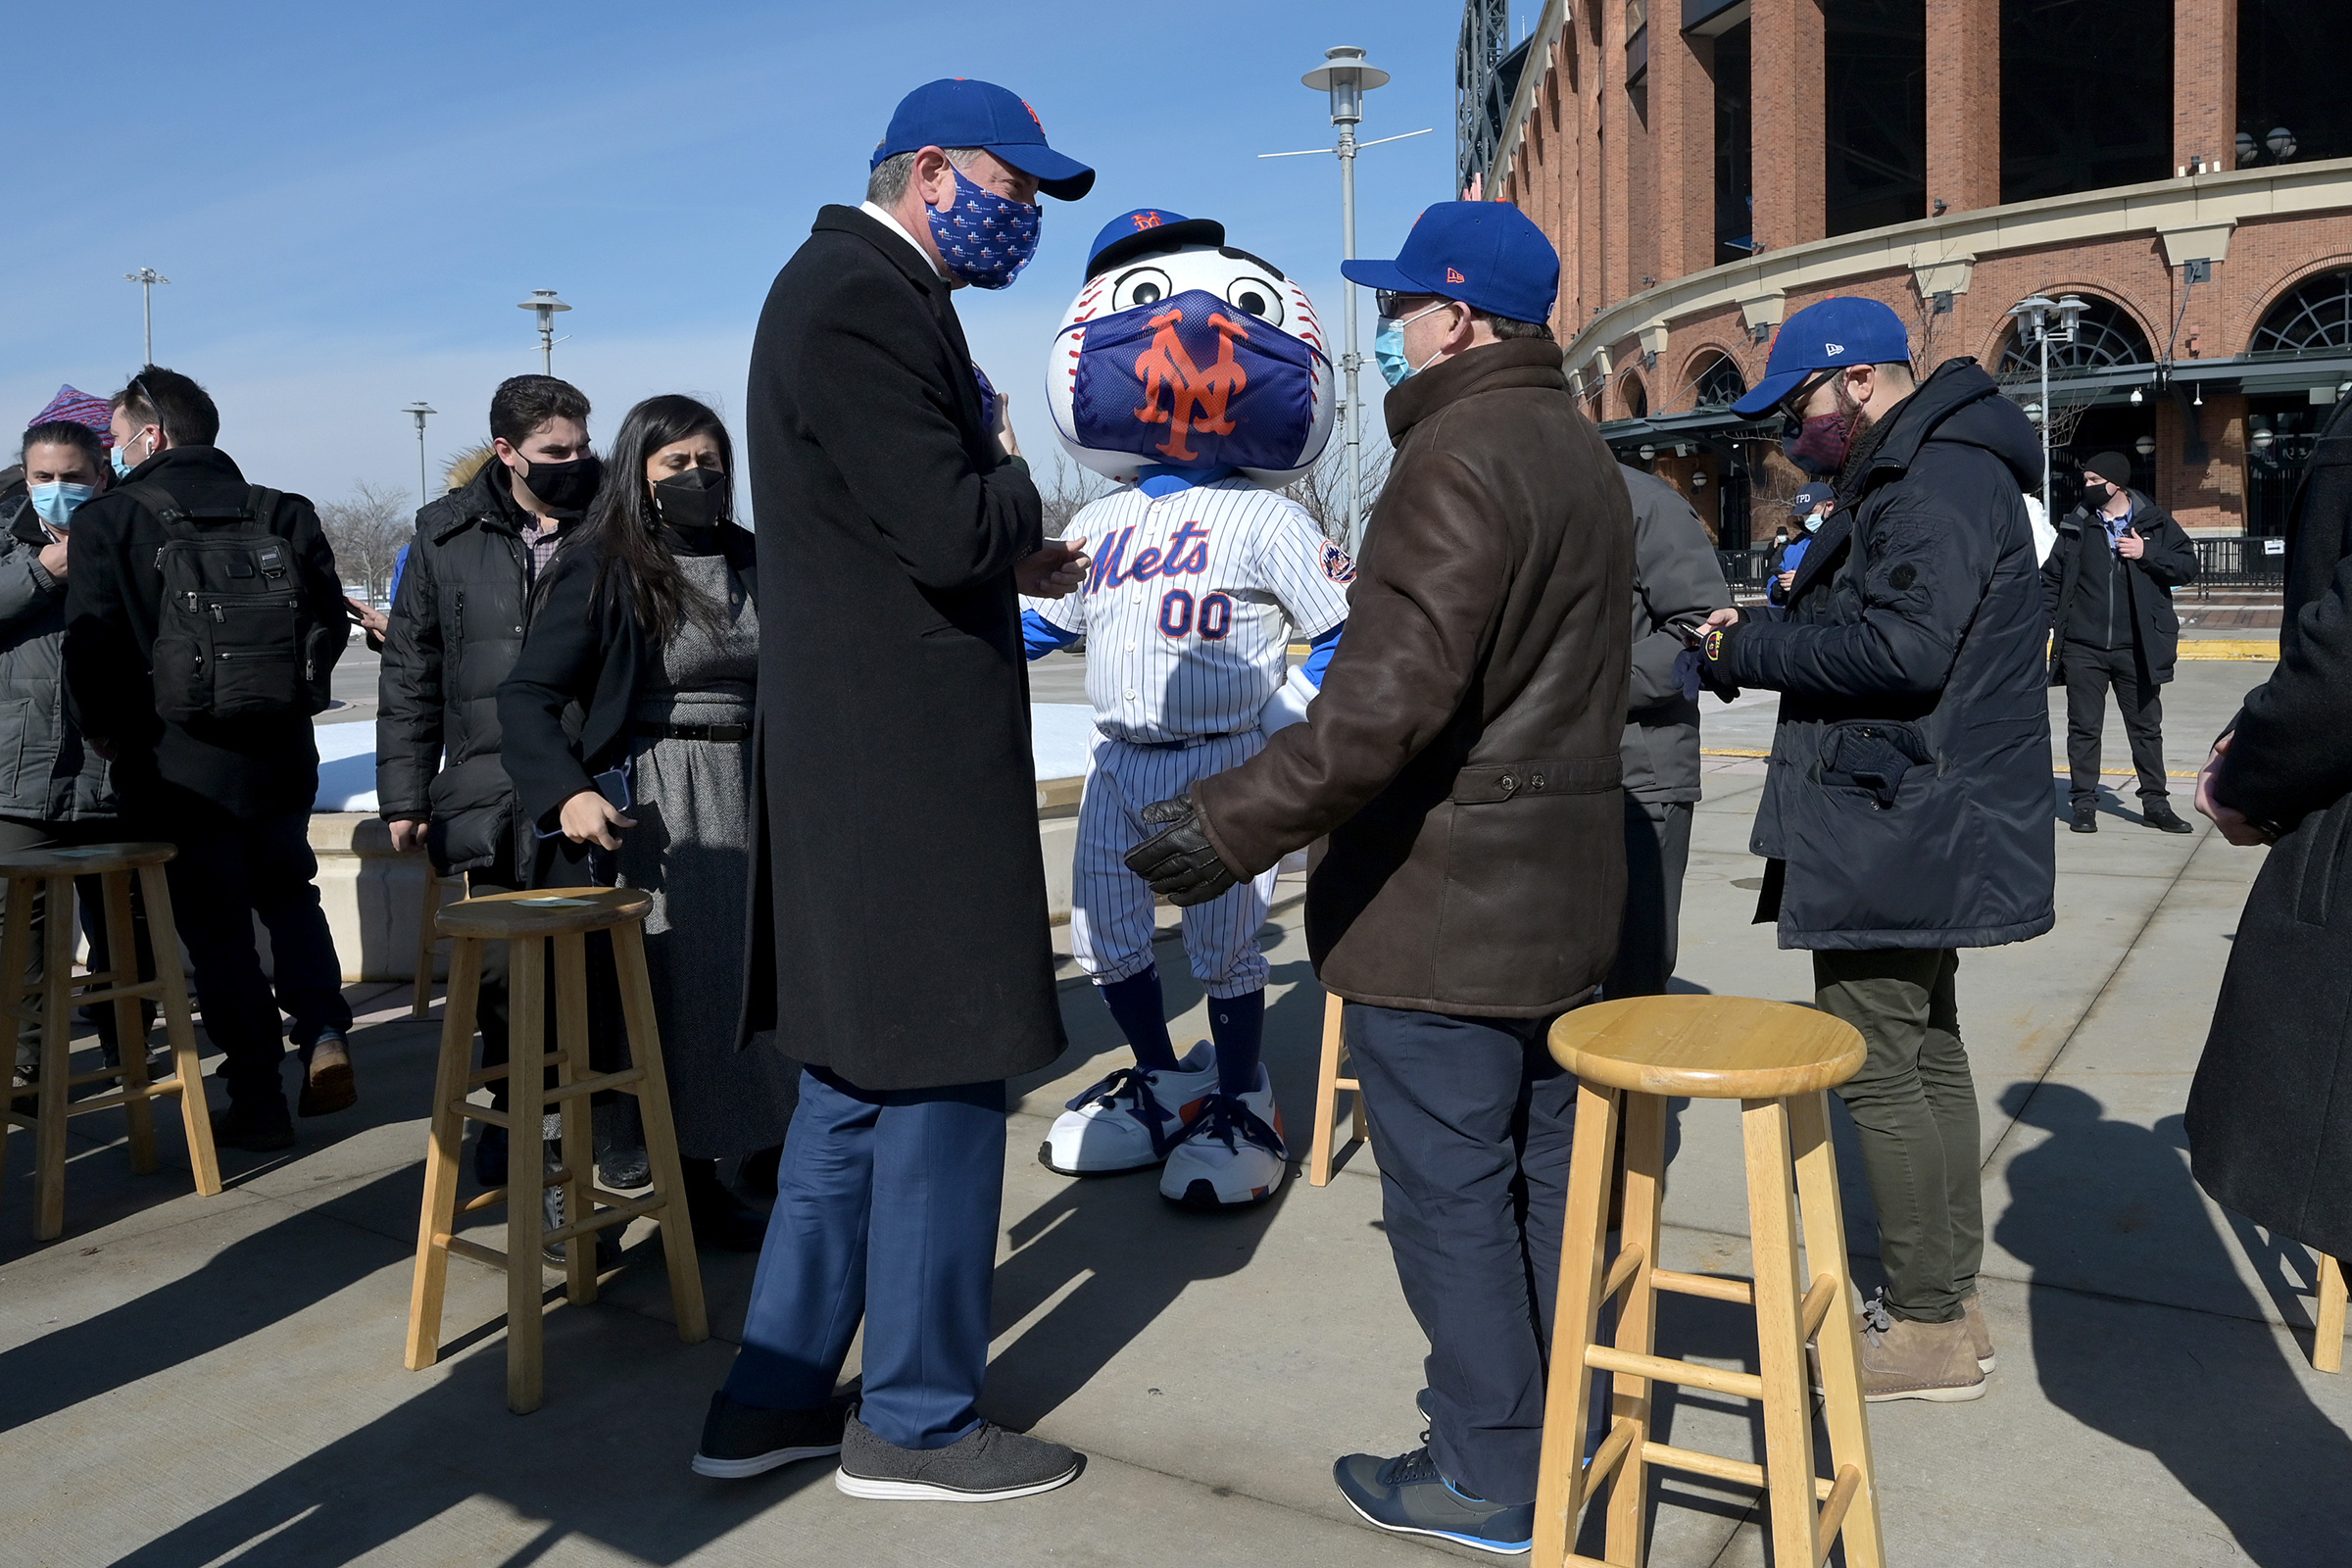 New York City Mayor Bill de Blasio, left, and New York Mets baseball team owner Steve Cohen speak after a press conference to announce the opening of Mets Citi Field stadium as a COVID-19 Vaccine Mega Hub in Queens, N.Y., on Feb. 10, 2021. (Anthony Behar—Sipa/AP)